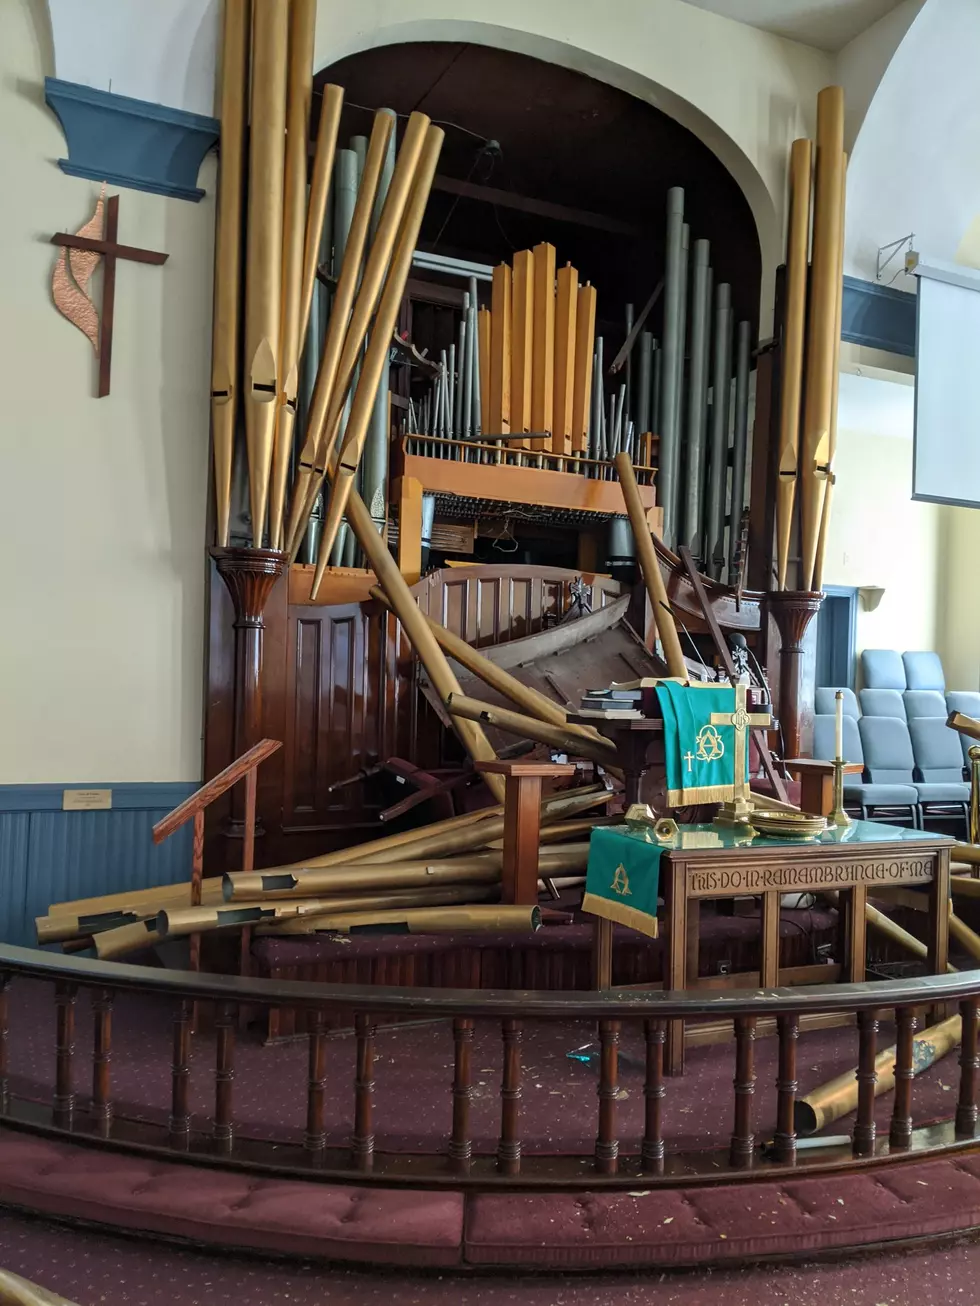 For Whom the Vandals Toll &#8212; Someone Stole Pipes from Freehold Boro Church